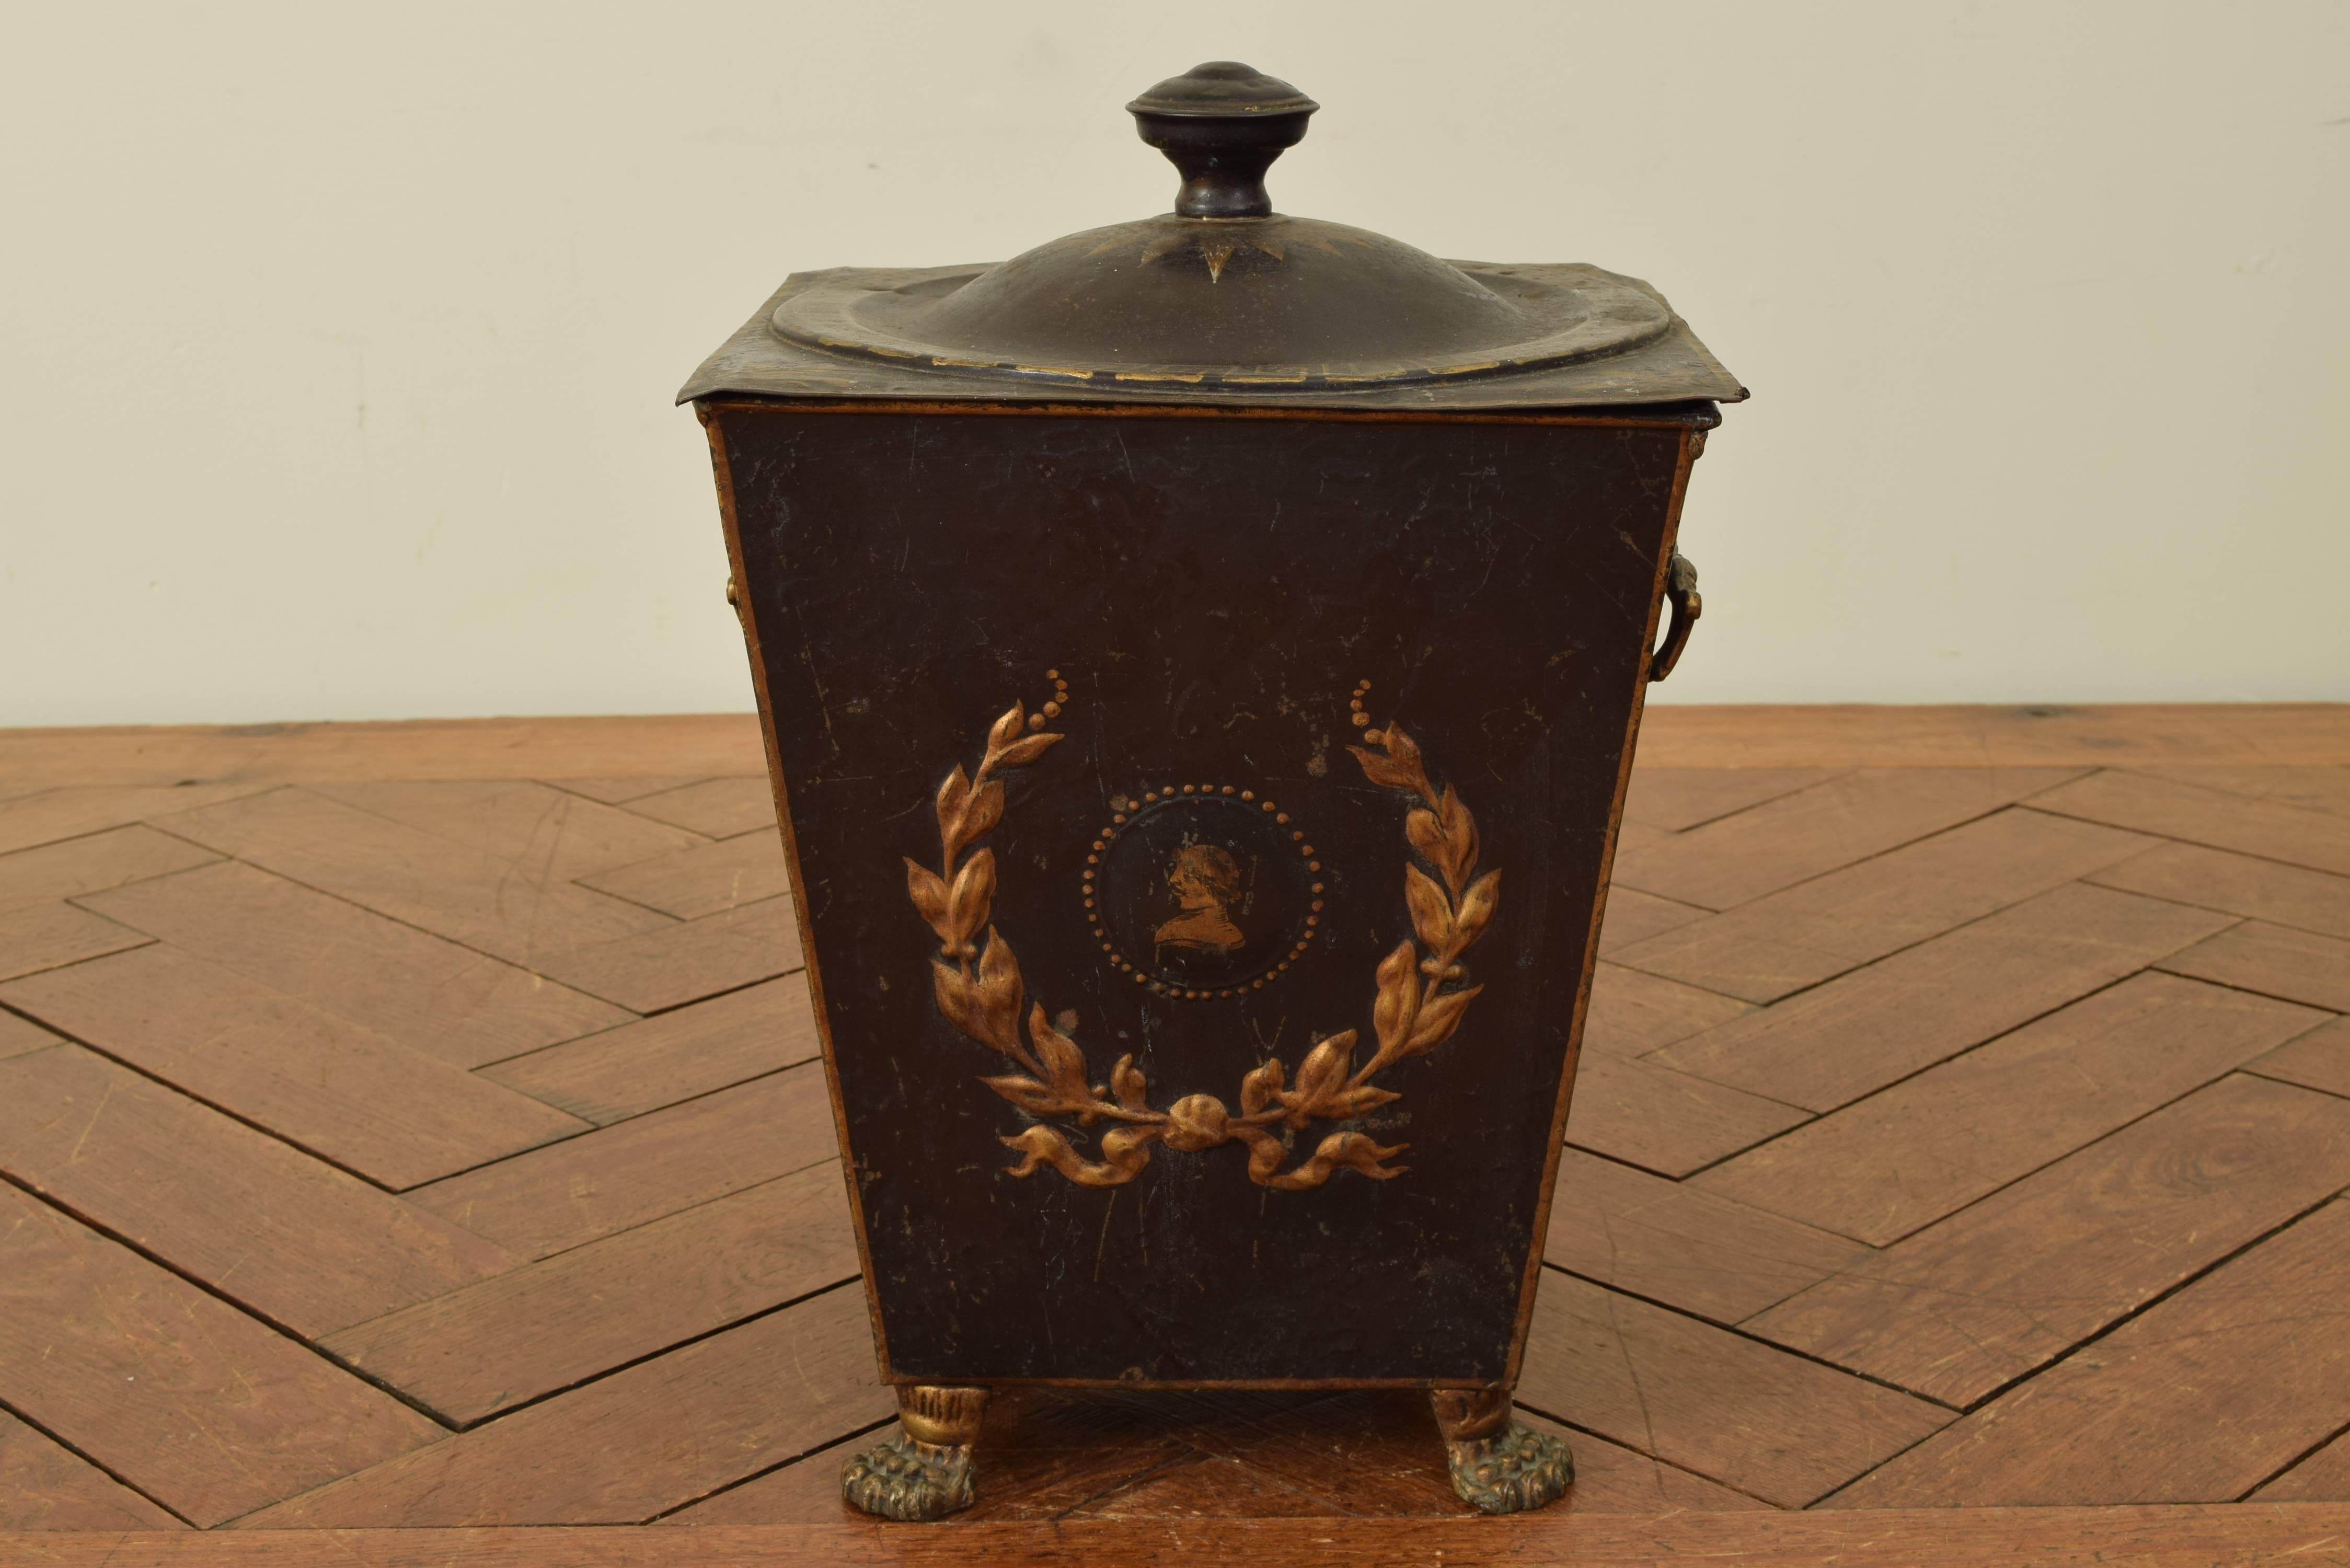 Of square tapering form, the removable top with a finial, Greek key and star painted decorations, the side with handles and painted wreaths and busts in profile, raised on cast painted metal feet.